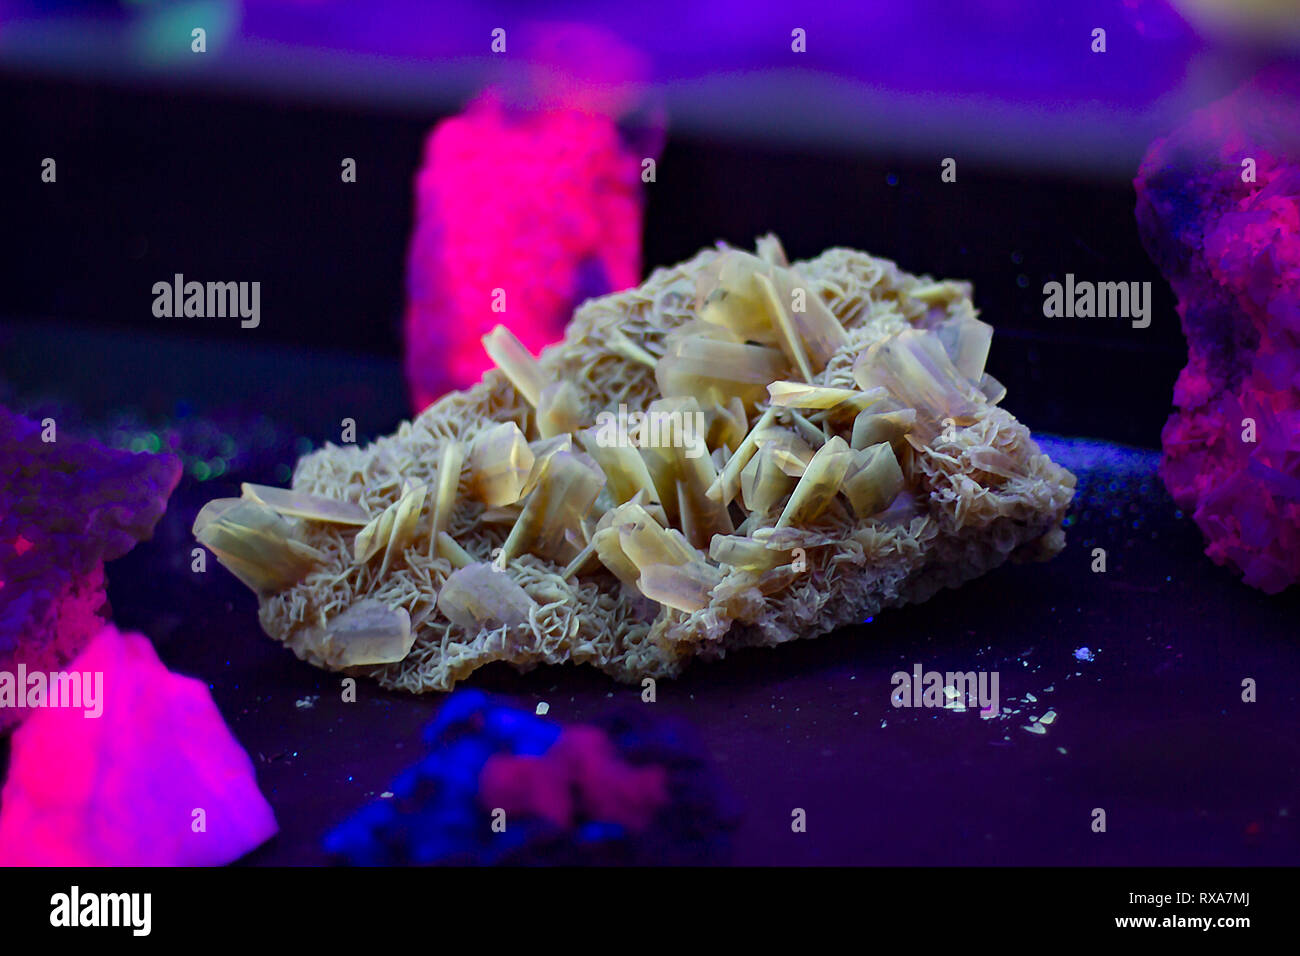 Desert rose also known as gypsum flower. Cluster of sharp, bladed selenite crystals. Fluorescent mineral under UV light at private rock collection. Stock Photo